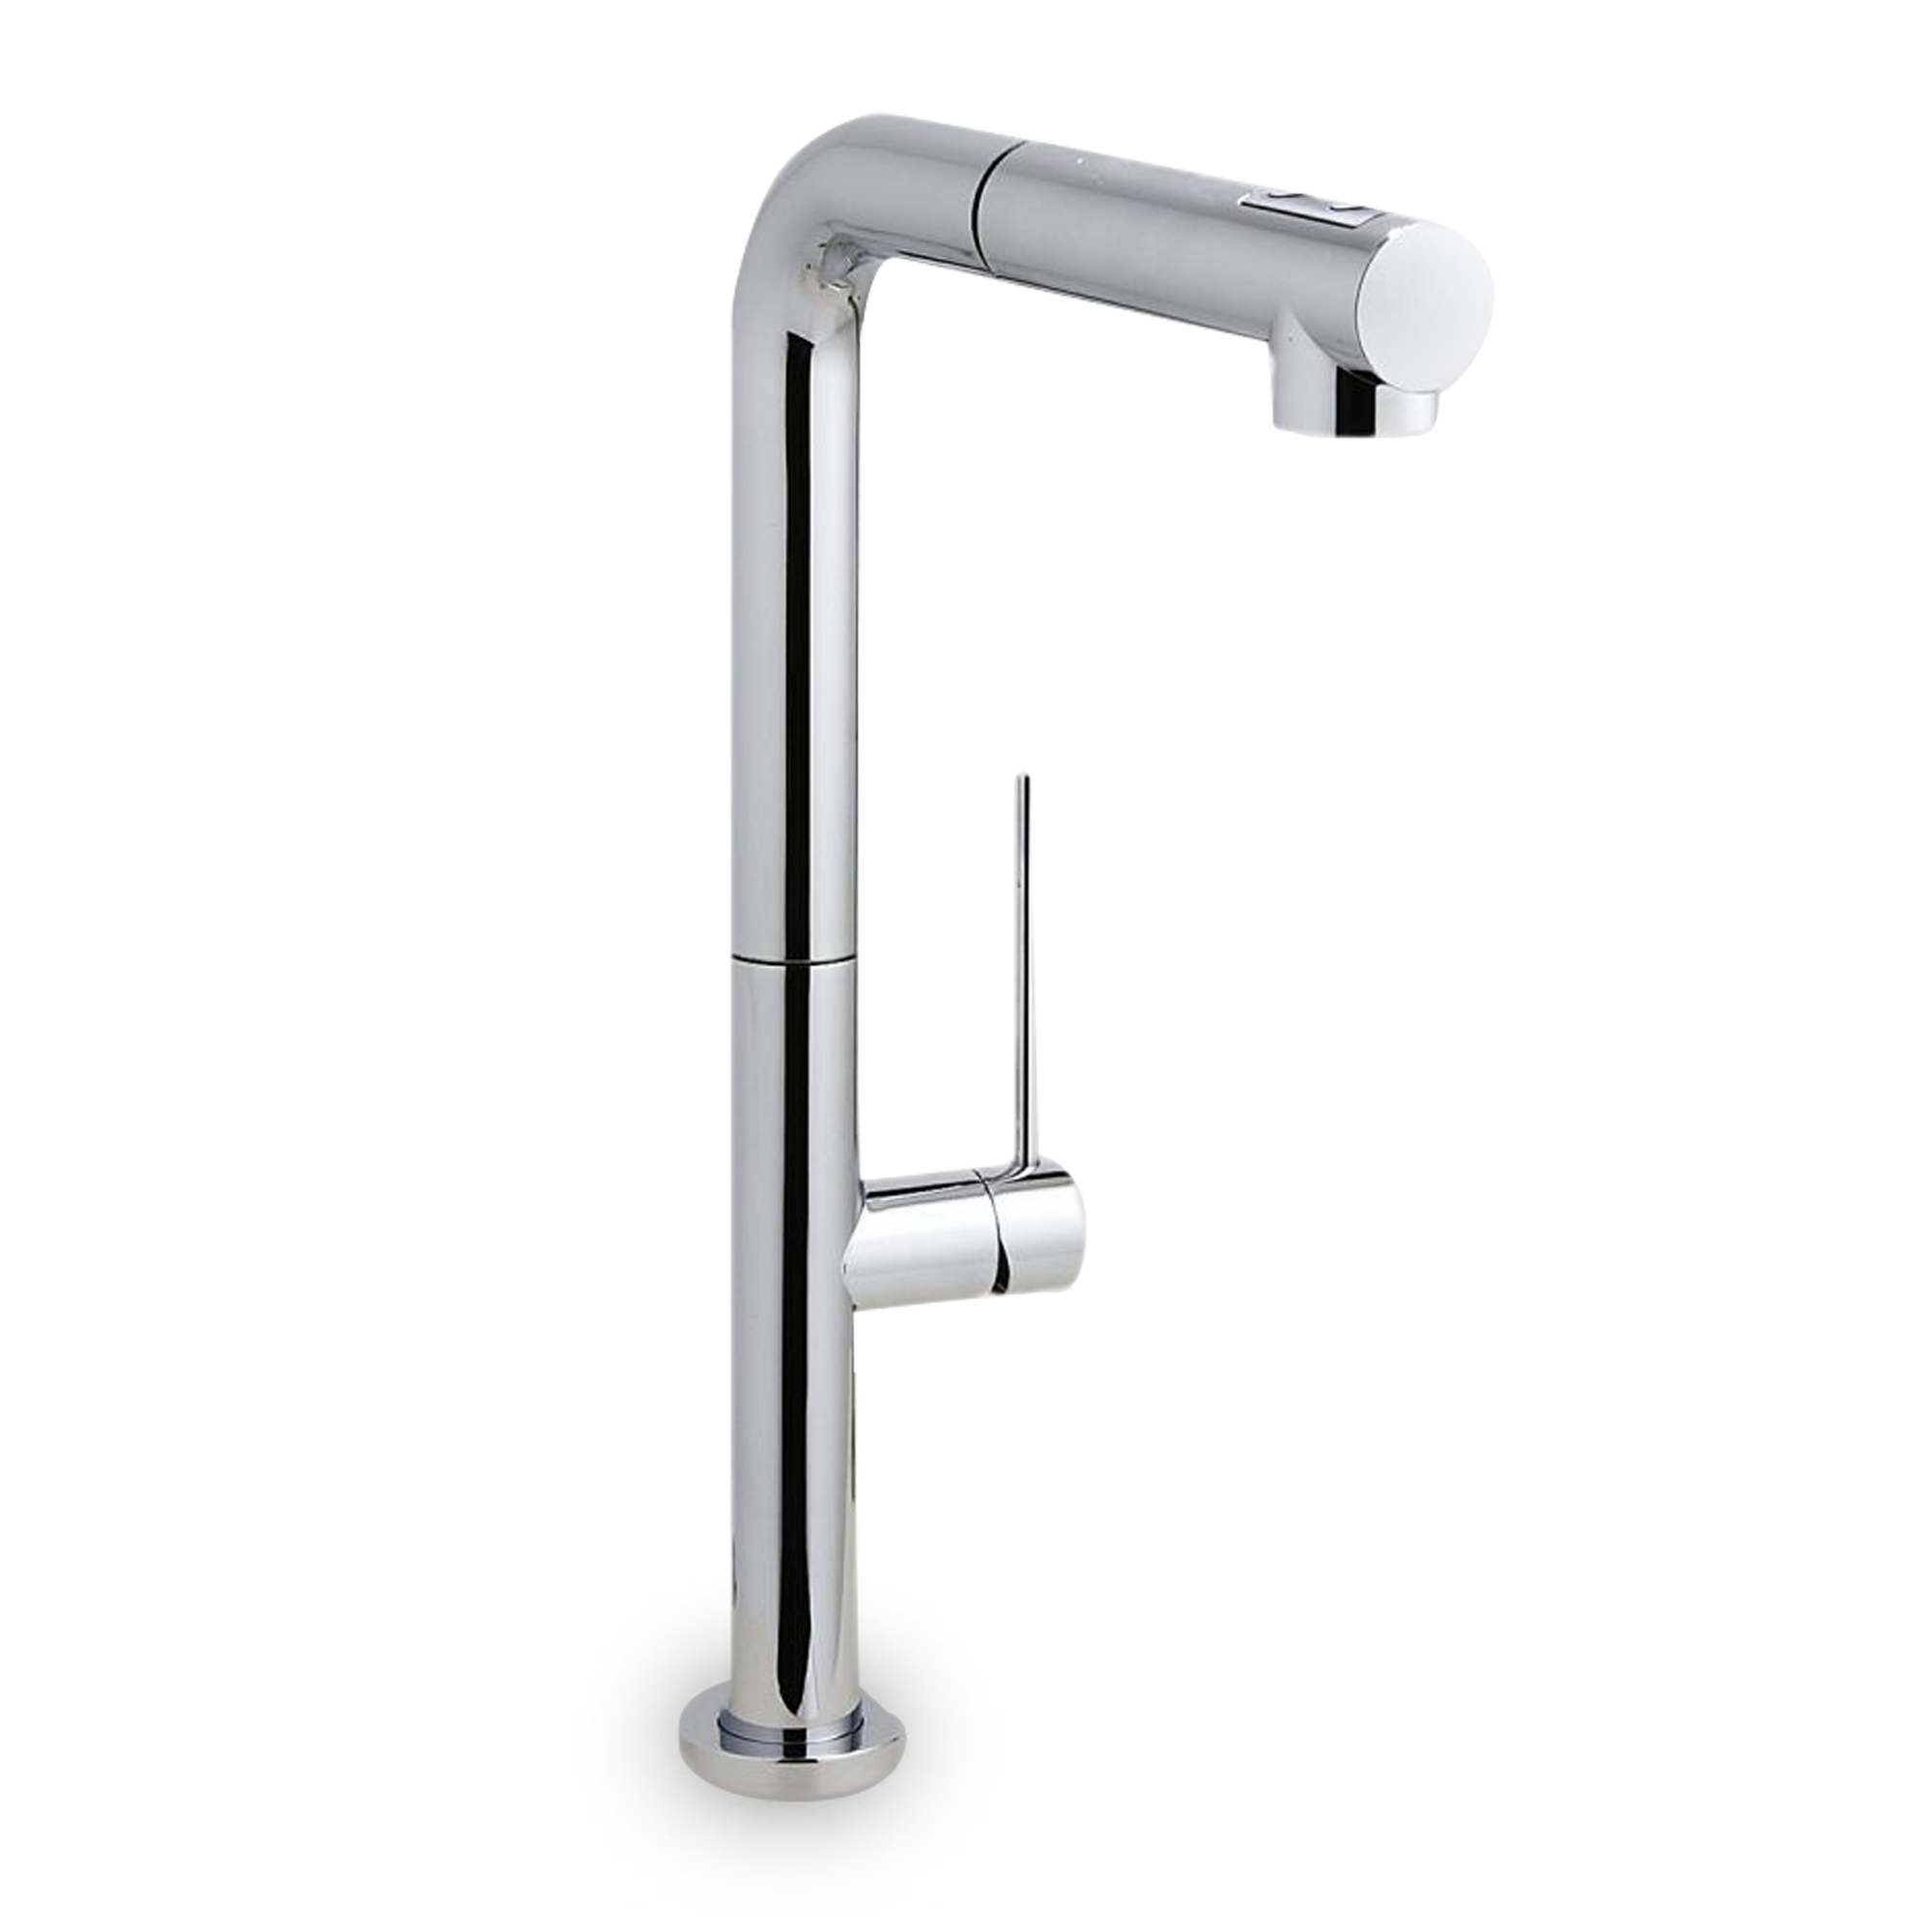 The Brennan faucet is a sleek, modern, featuring a cylindrical bent shape and a pull-out shower double jet.